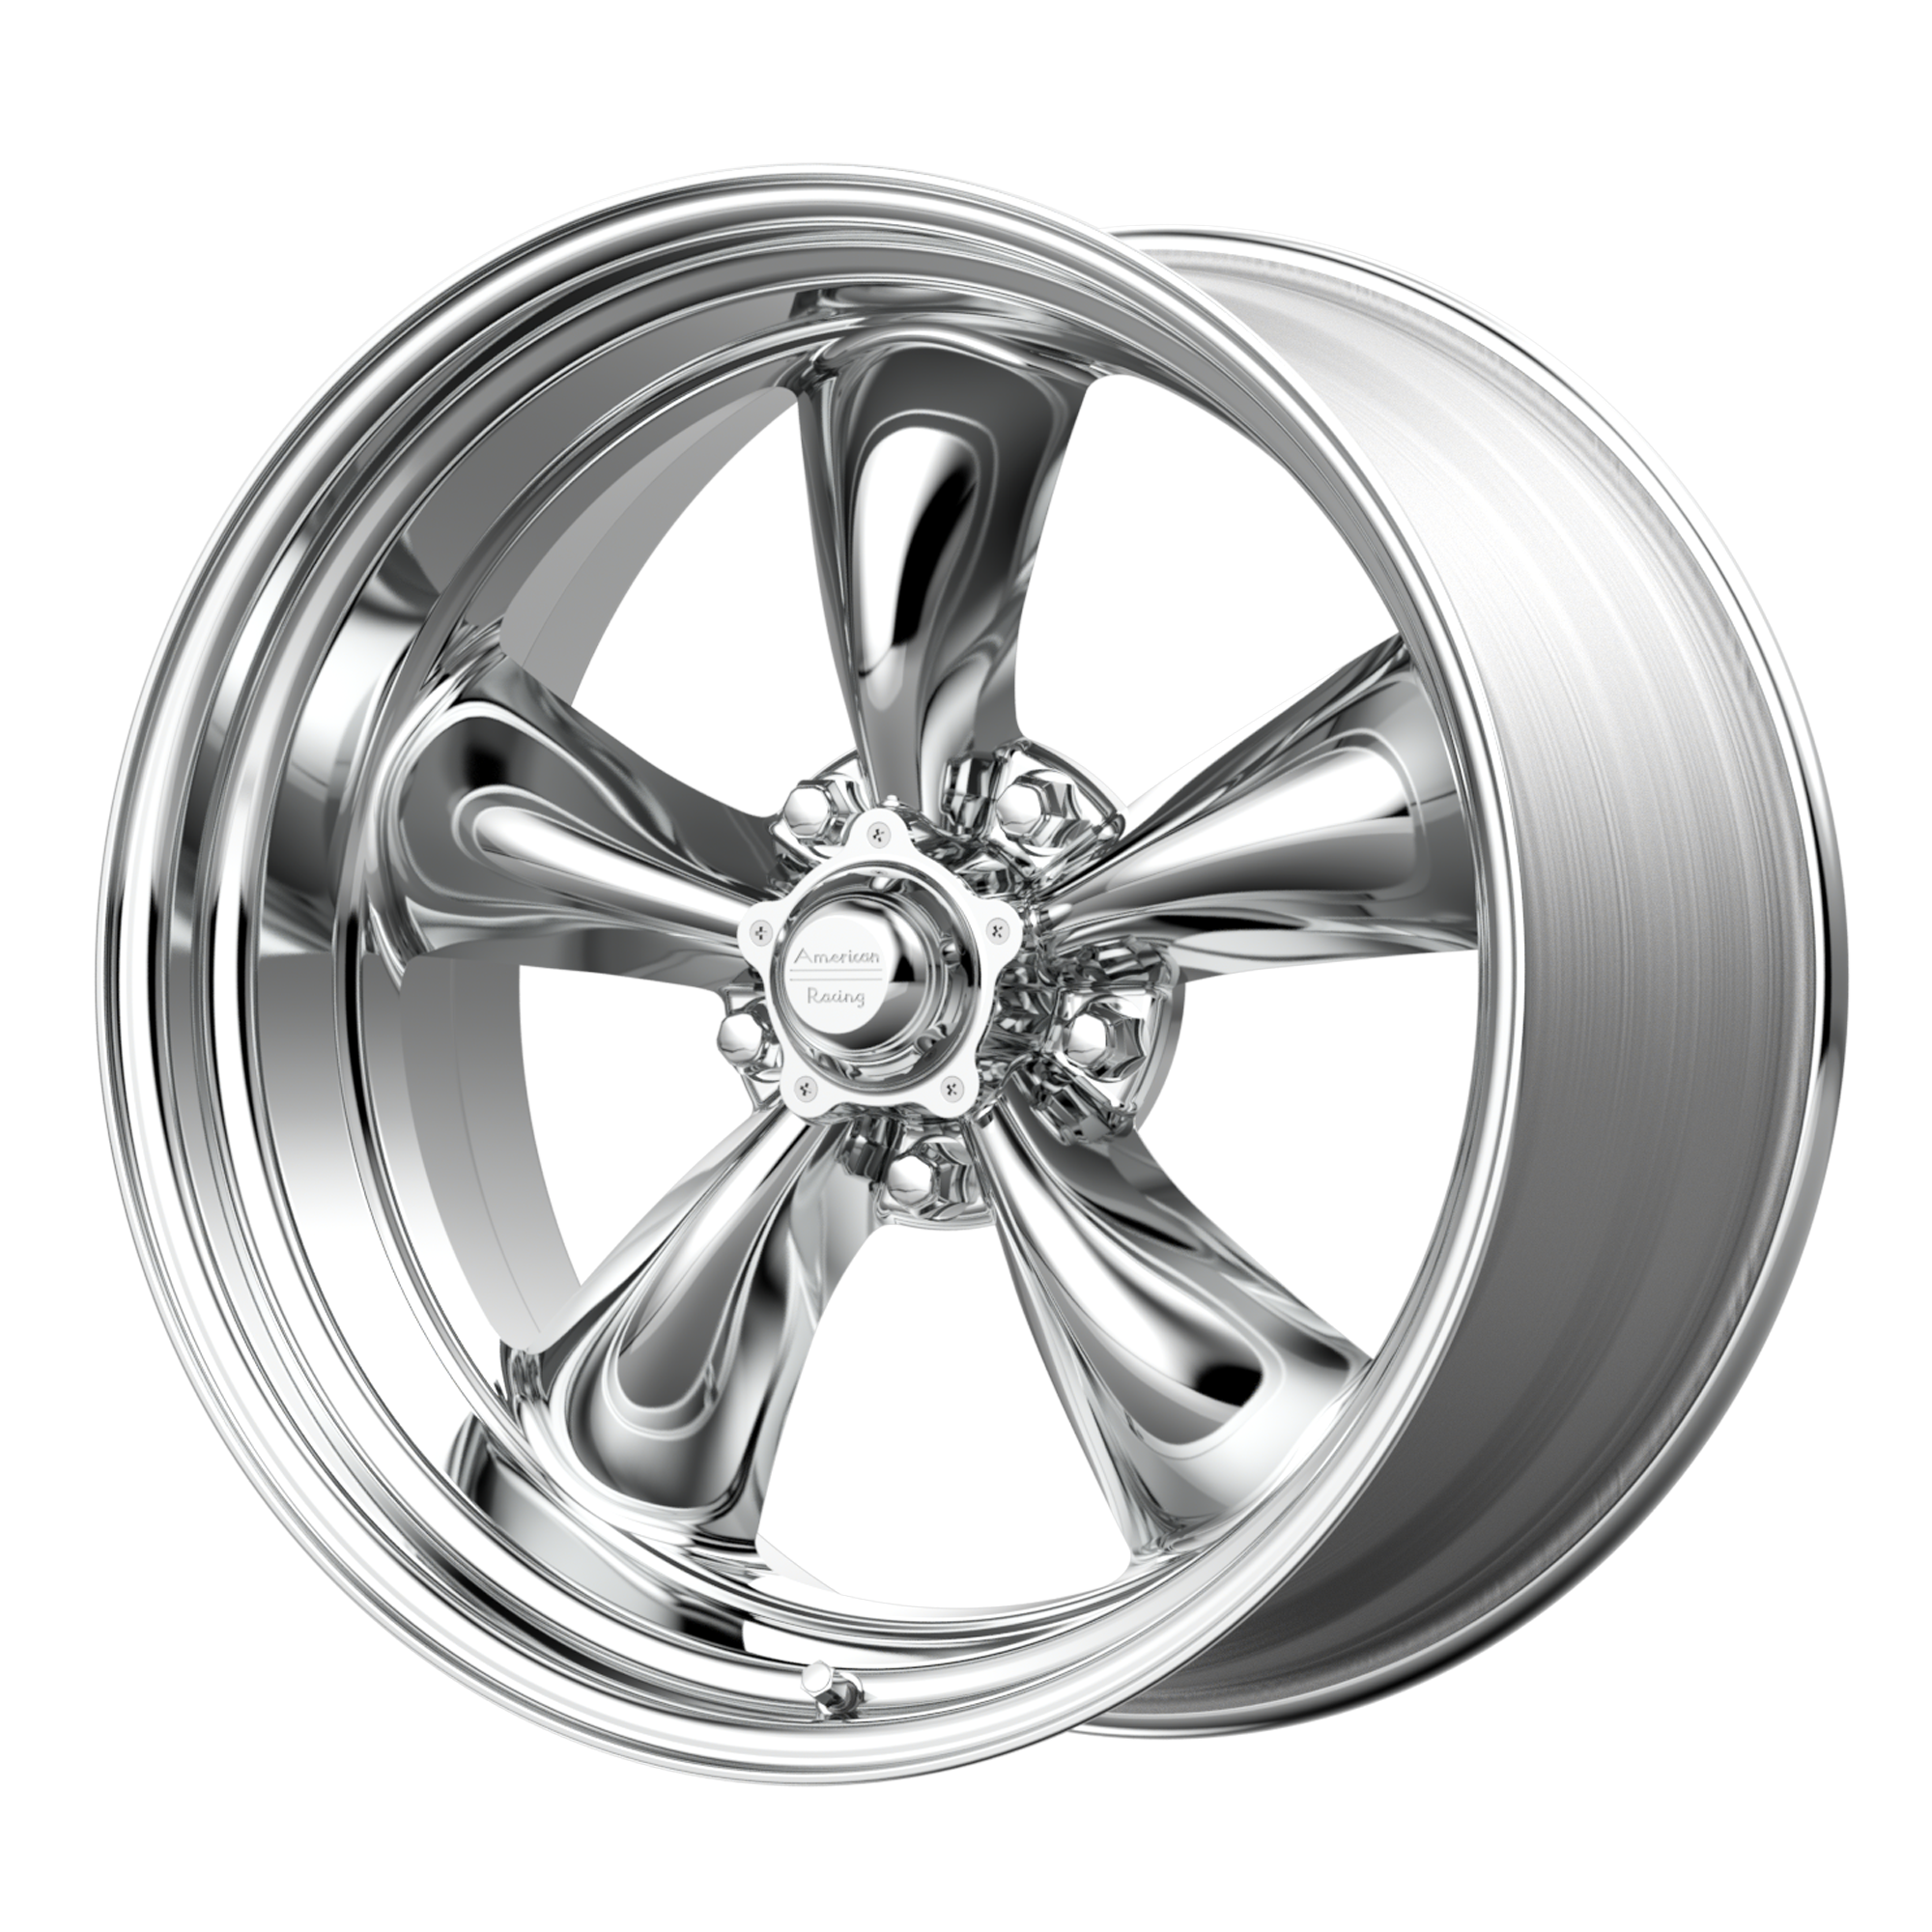 TORQ THRUST II 1 PC 15x8 5x120.65 POLISHED (0 mm) - Tires and Engine Performance